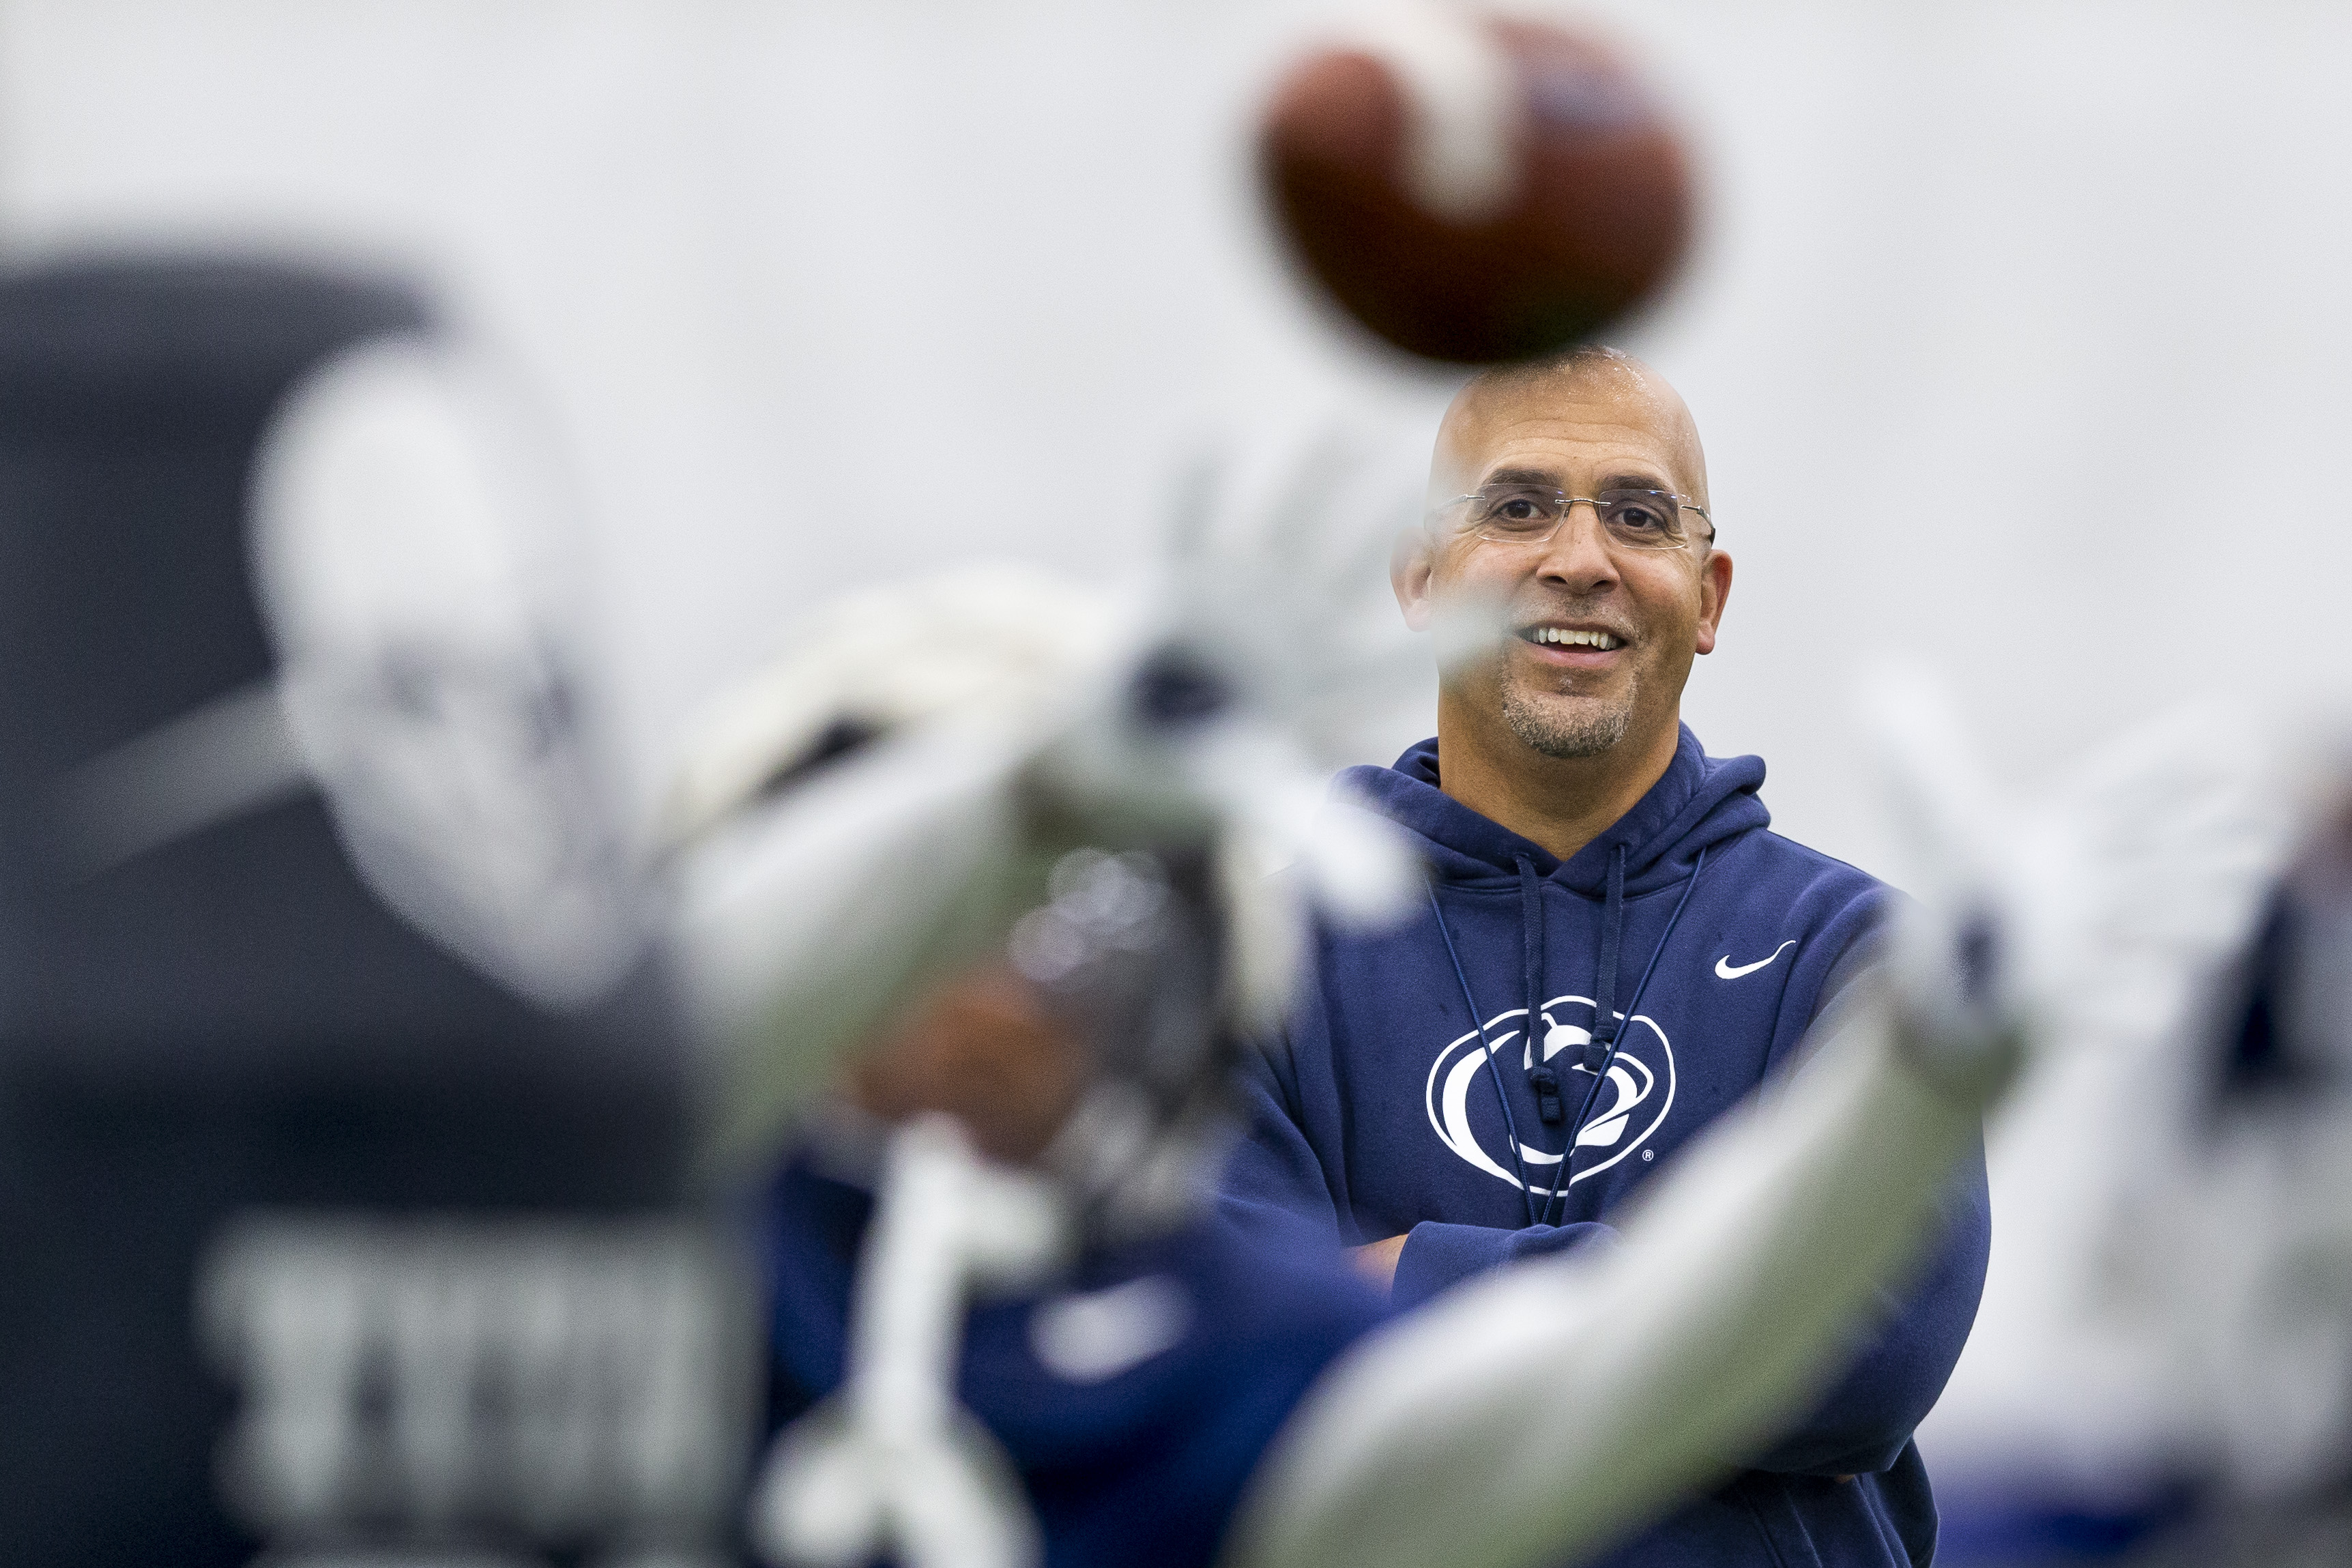 Hey, Jones!”: Can PSU make McCarthy uneasy? How do Nits fare after